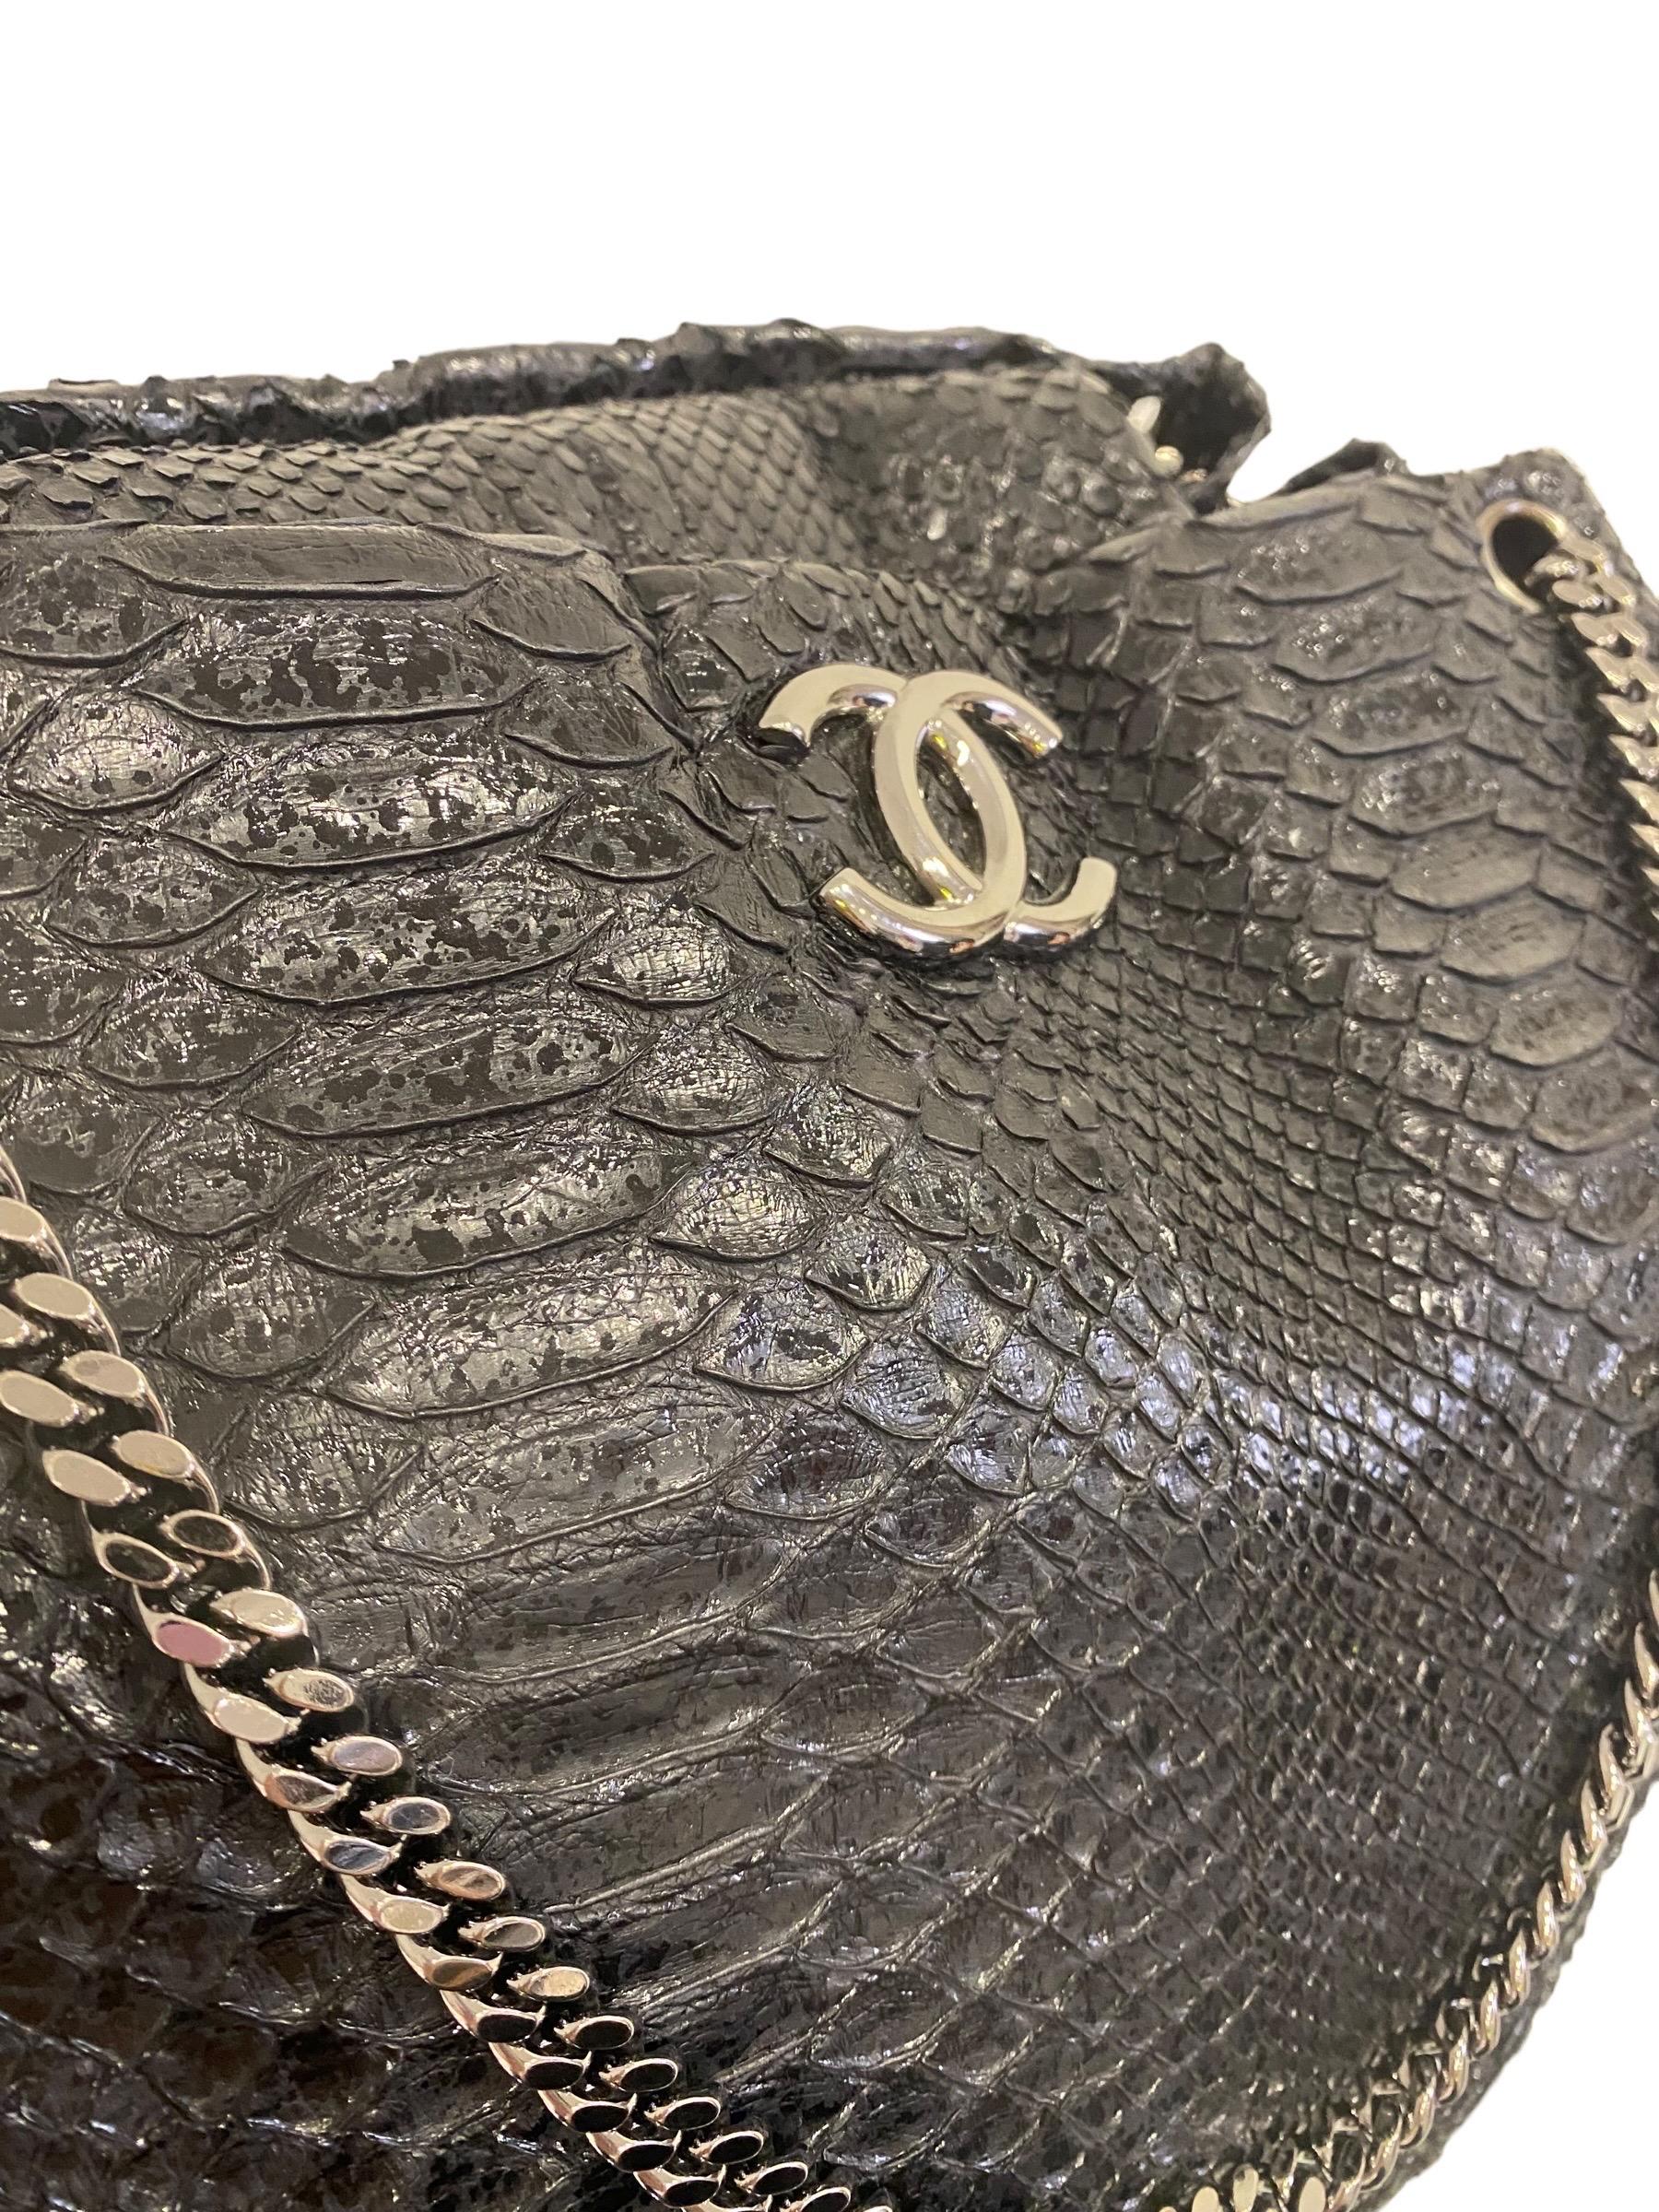 2009 Chanel Tote Black Piton Hobo Bag In Excellent Condition For Sale In Torre Del Greco, IT